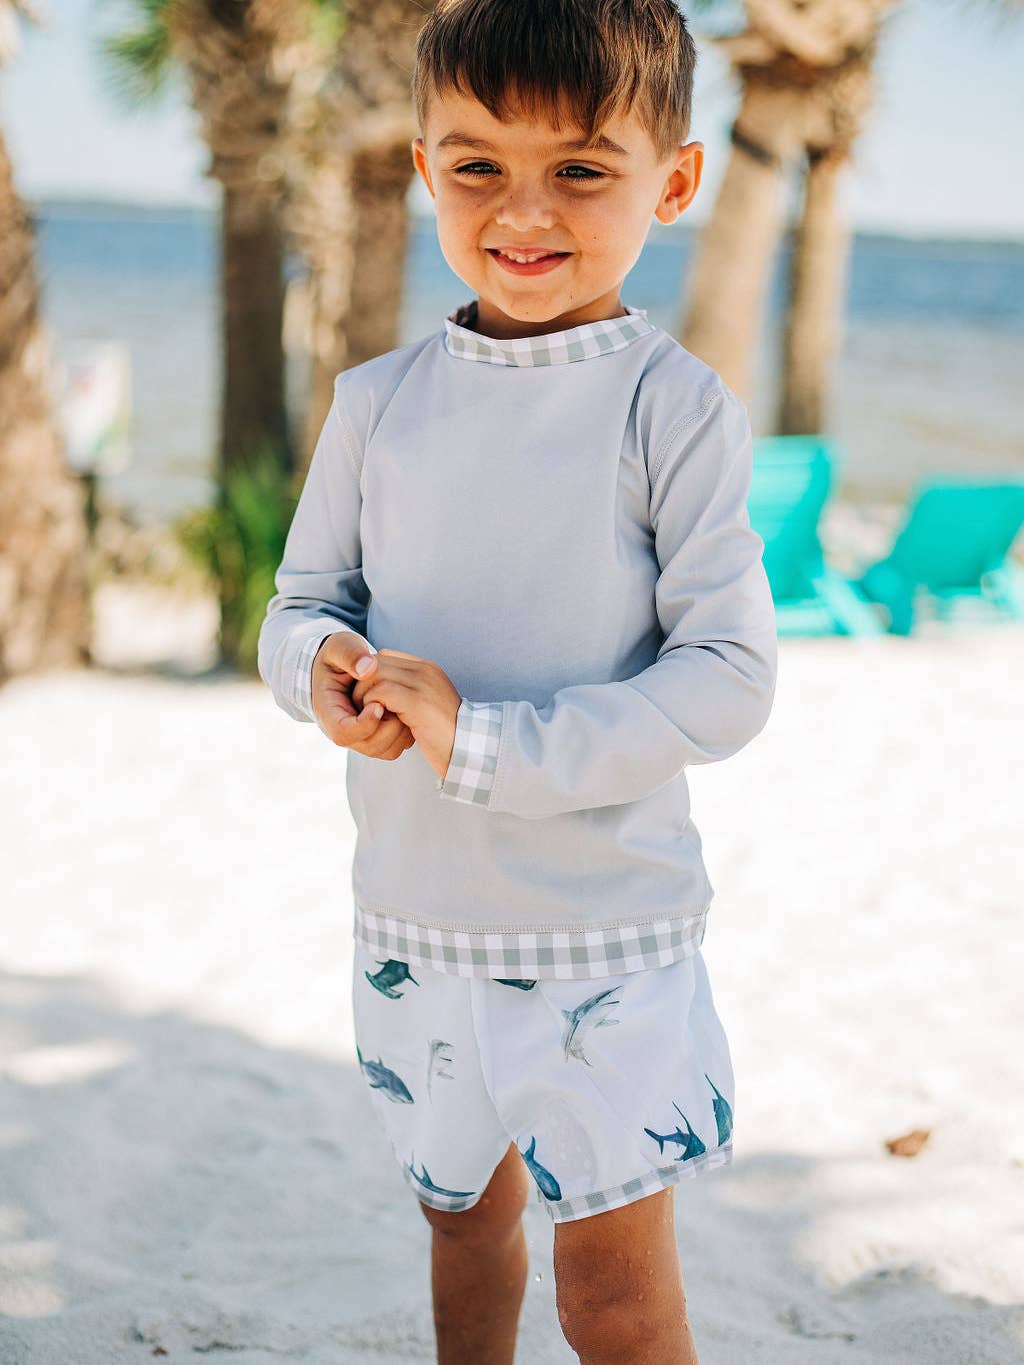 A young boy standing on a beach next to a palm tree, wearing a Boys Gingham Rashguard from Sugar Bee Clothing.